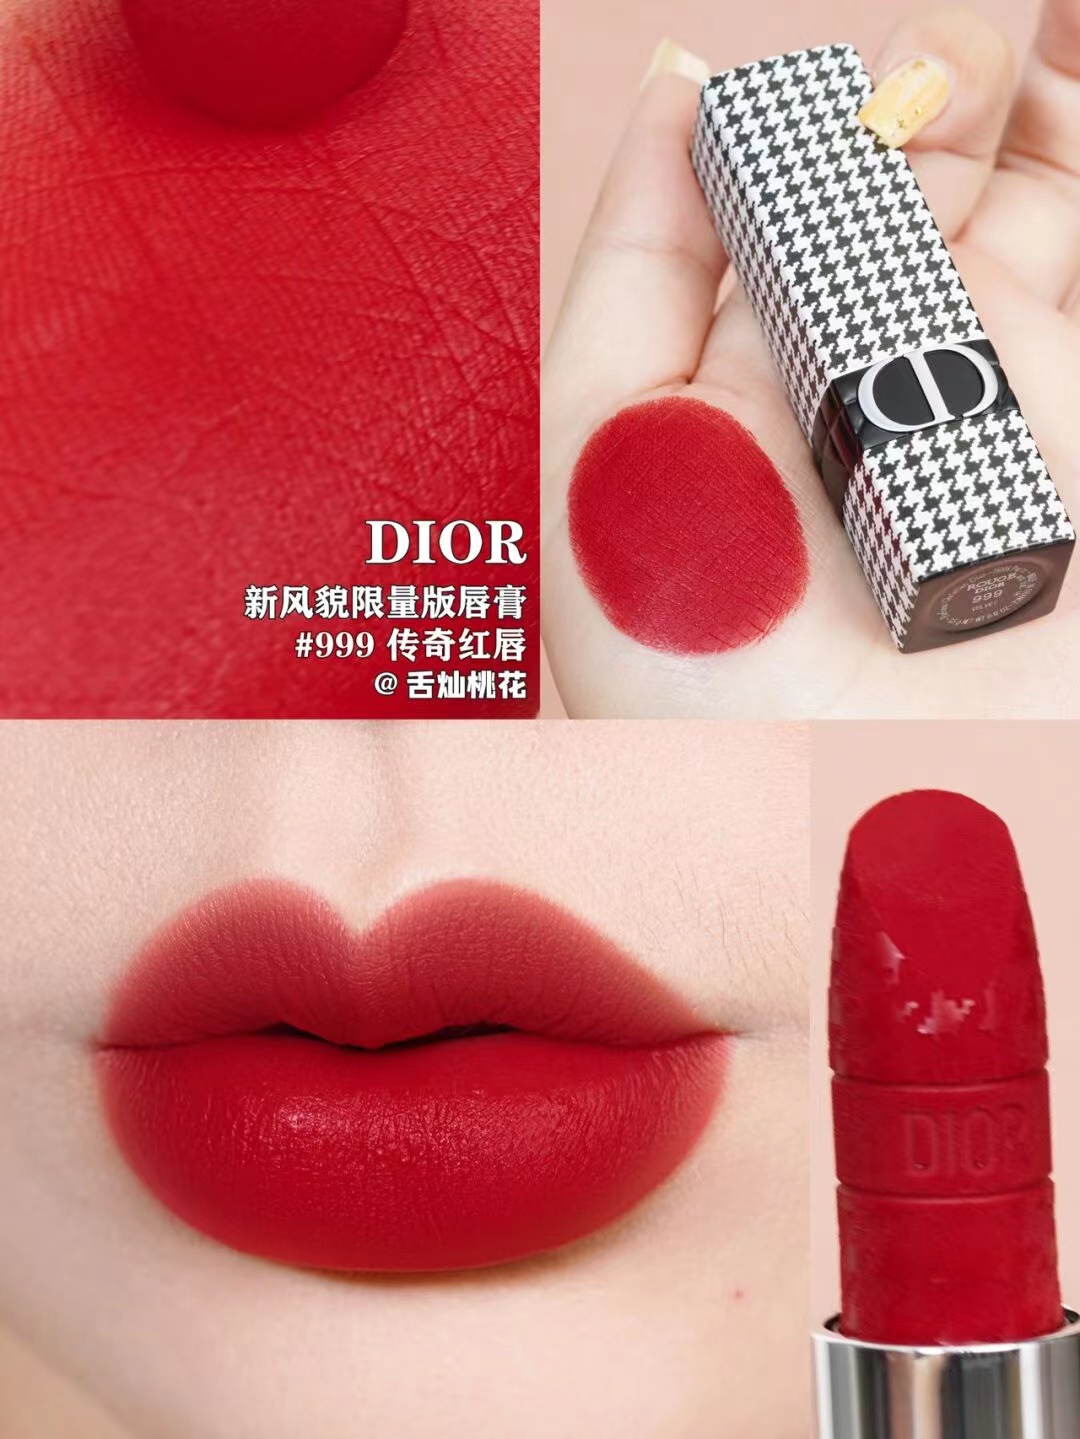 DIOR Rouge Dior  New Look Limited Edition Lipstick and Colored Lip Balm   Houndstooth Motif  Centralcoth